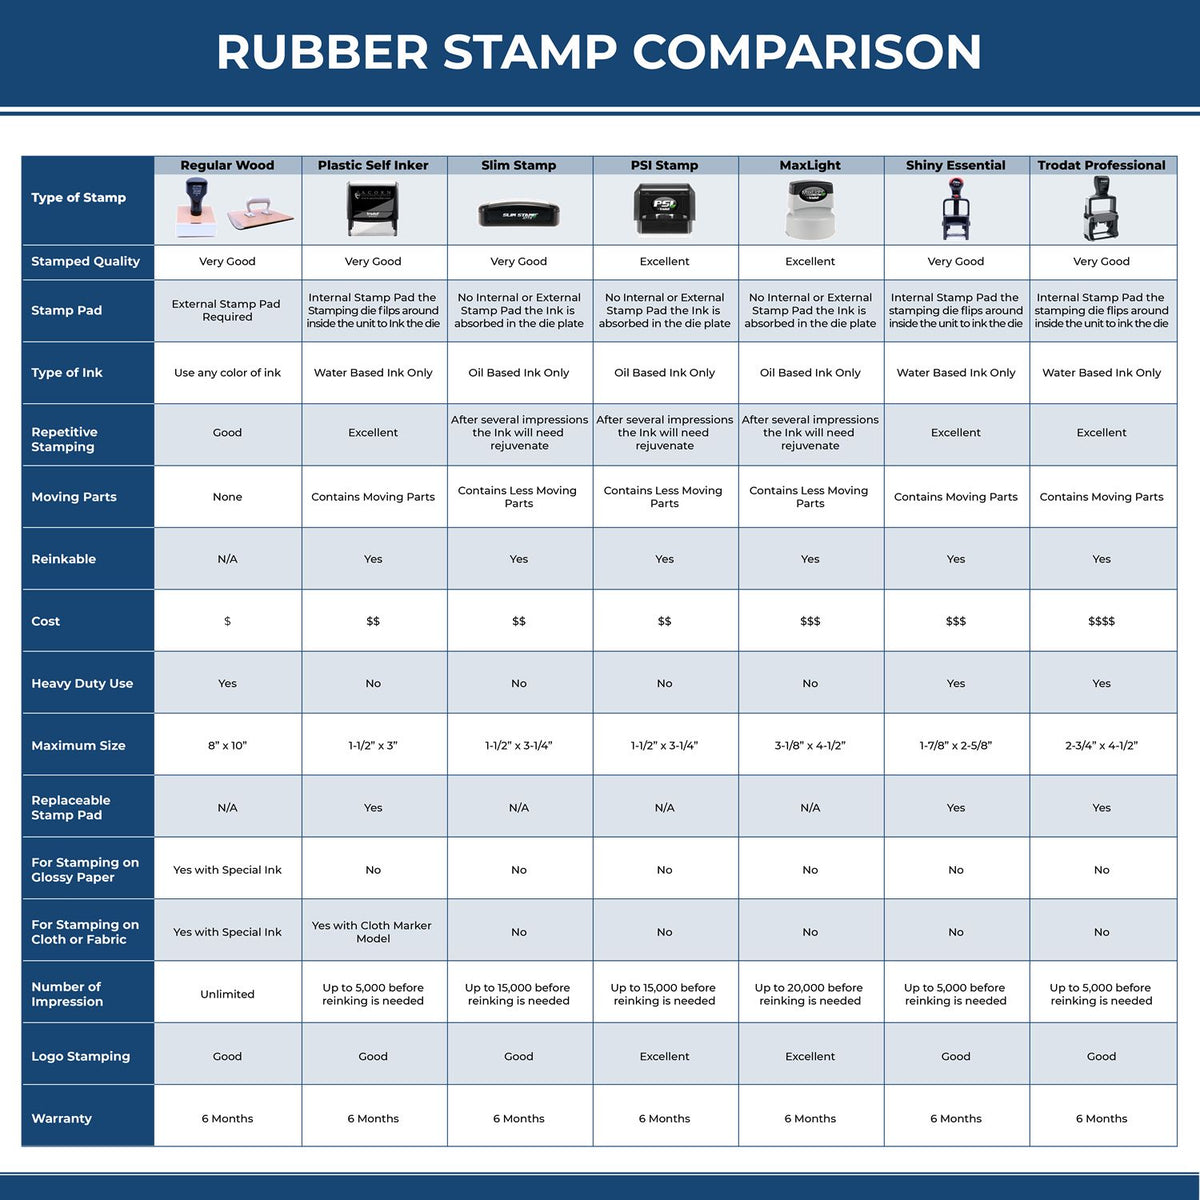 Large Self-Inking Refused Stamp 4967S Rubber Stamp Comparison